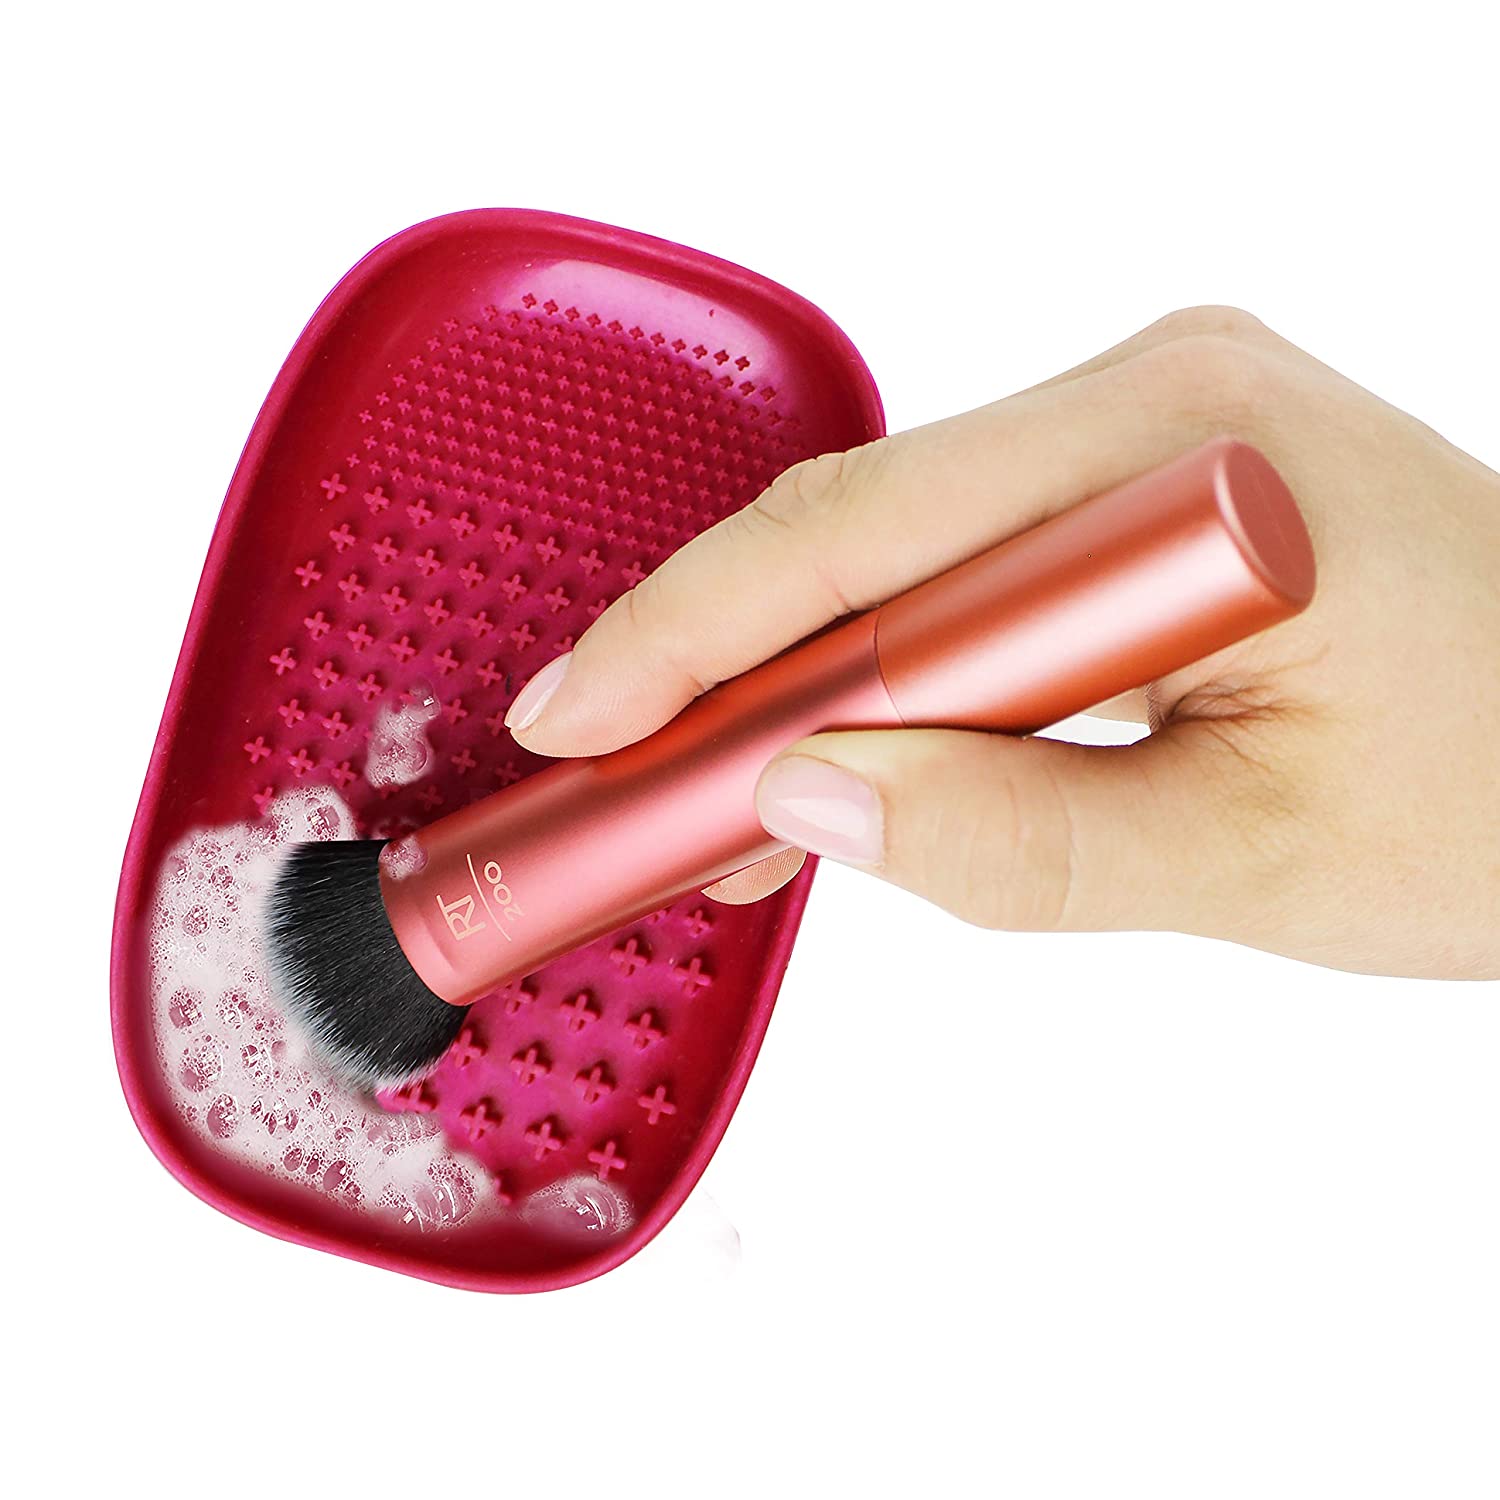 can you use the mac brush cleaner on the sigma matt